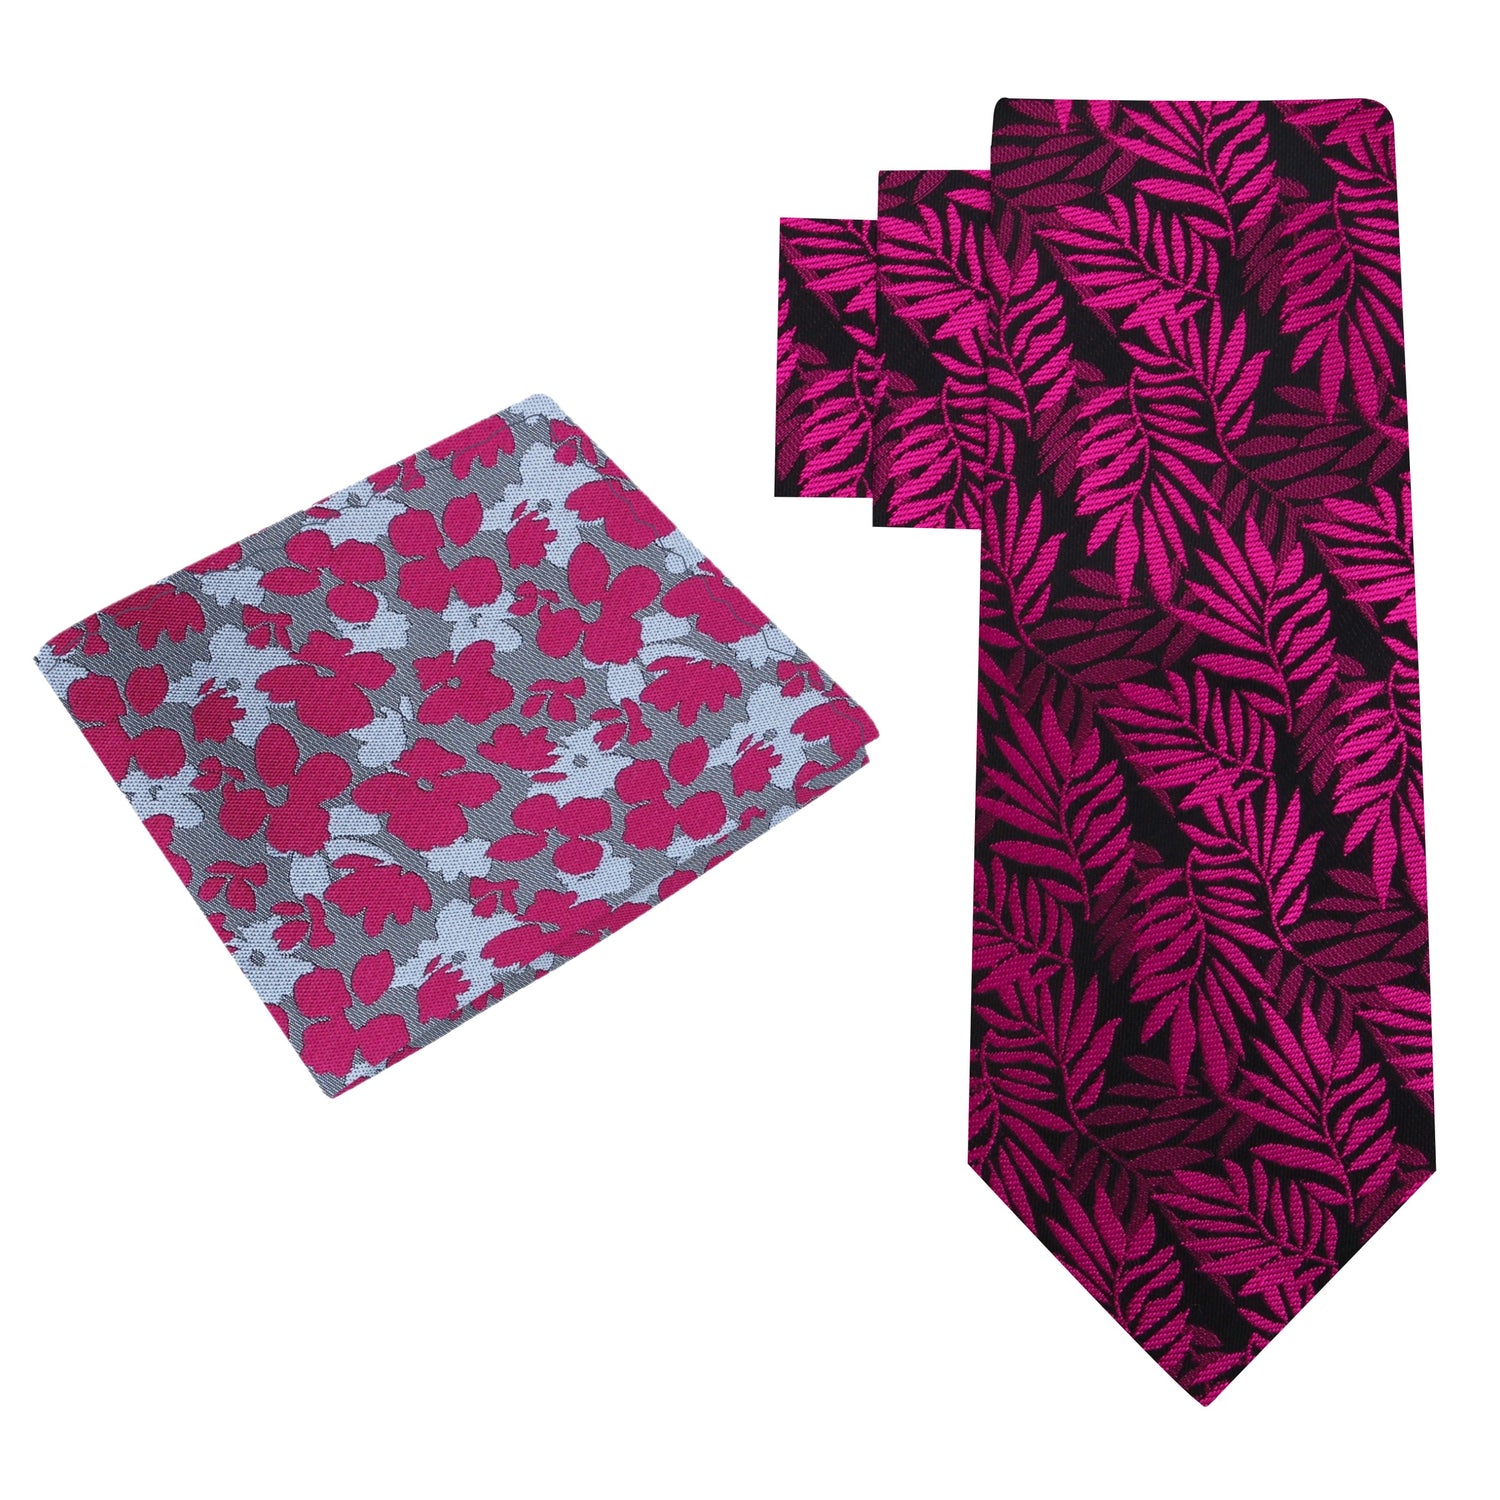 Alt View: Black with Reddish Pink Leaves Necktie and Grey, Red Sketched Flowers Square